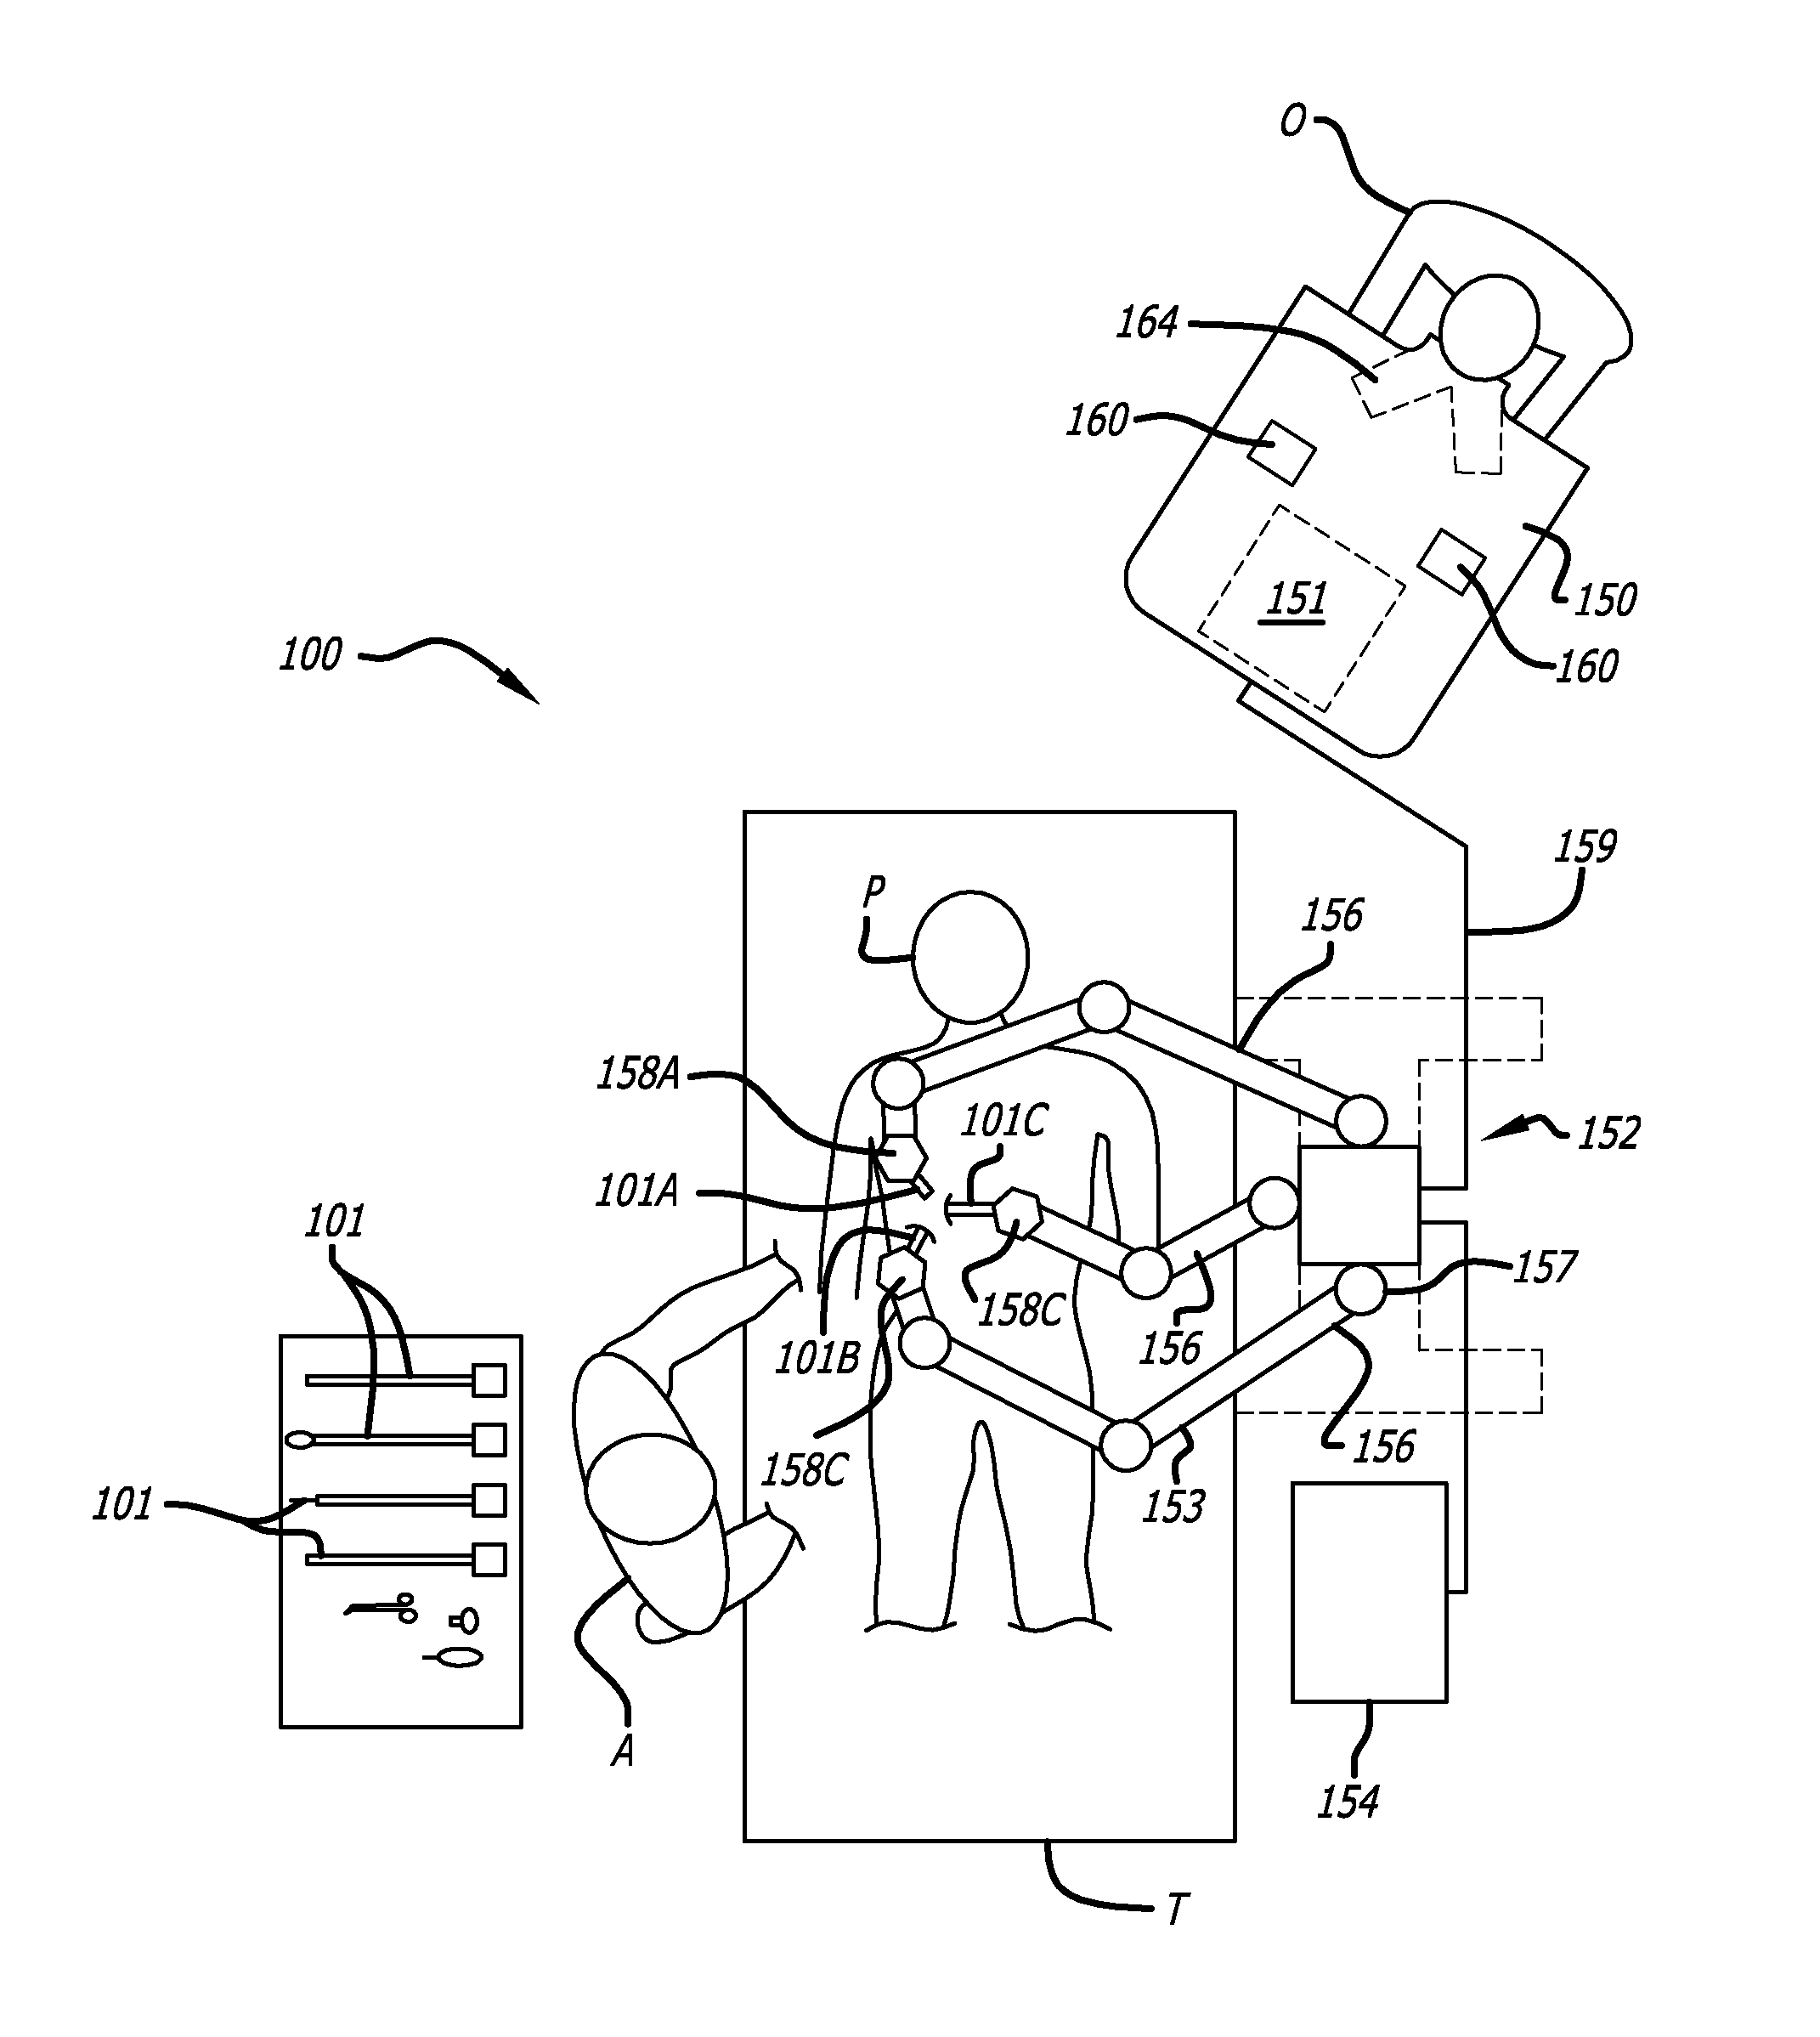 Tool tracking systems and methods for image guided surgery